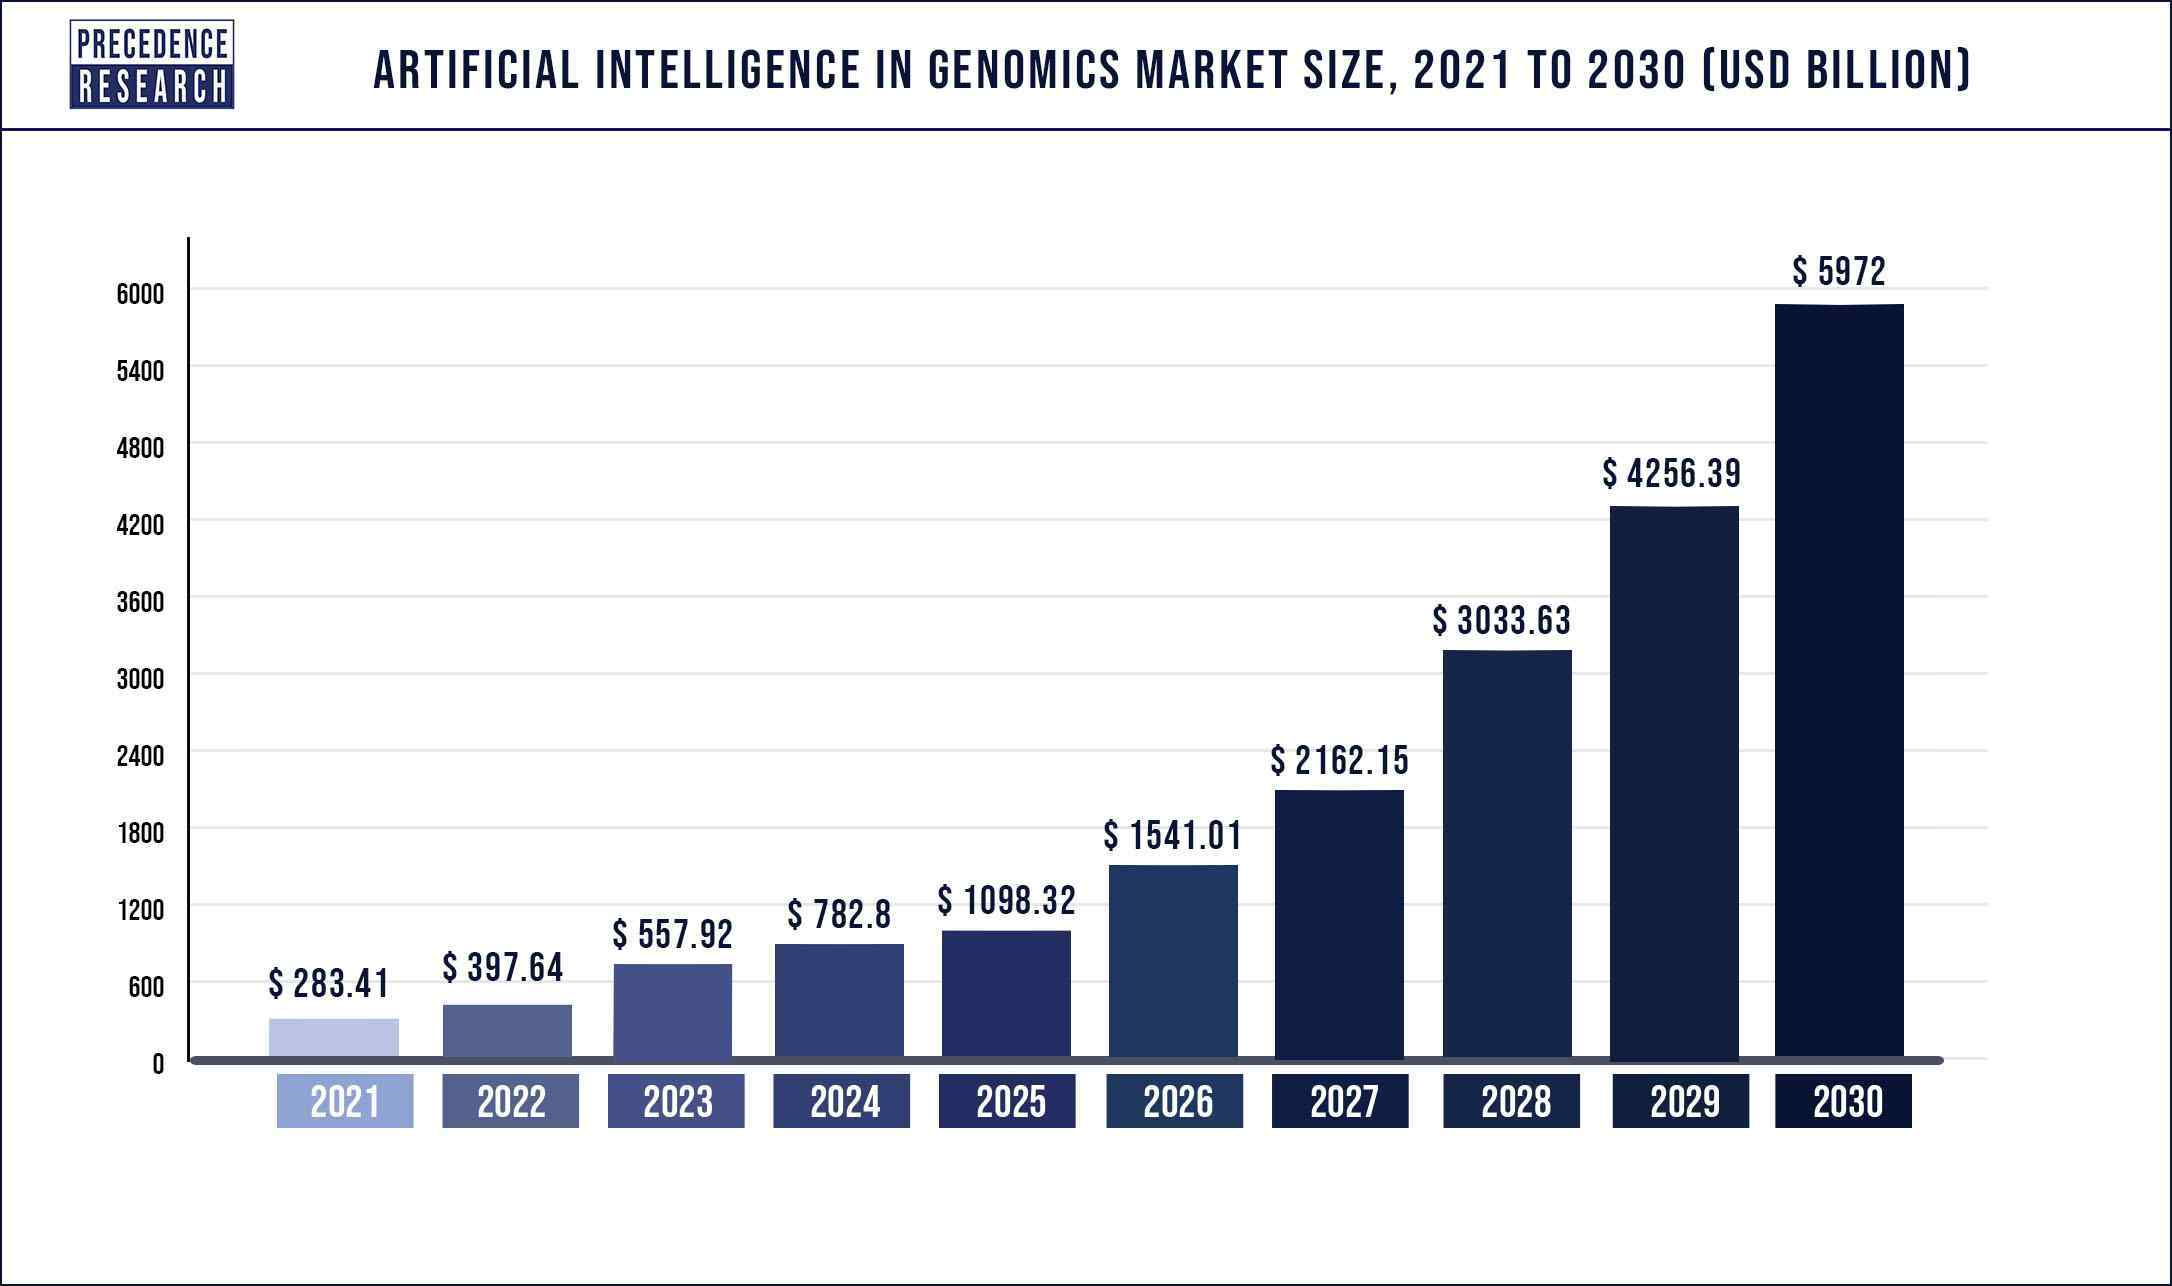 Artificial Intelligence in Genomics Market Size 2021 to 2030